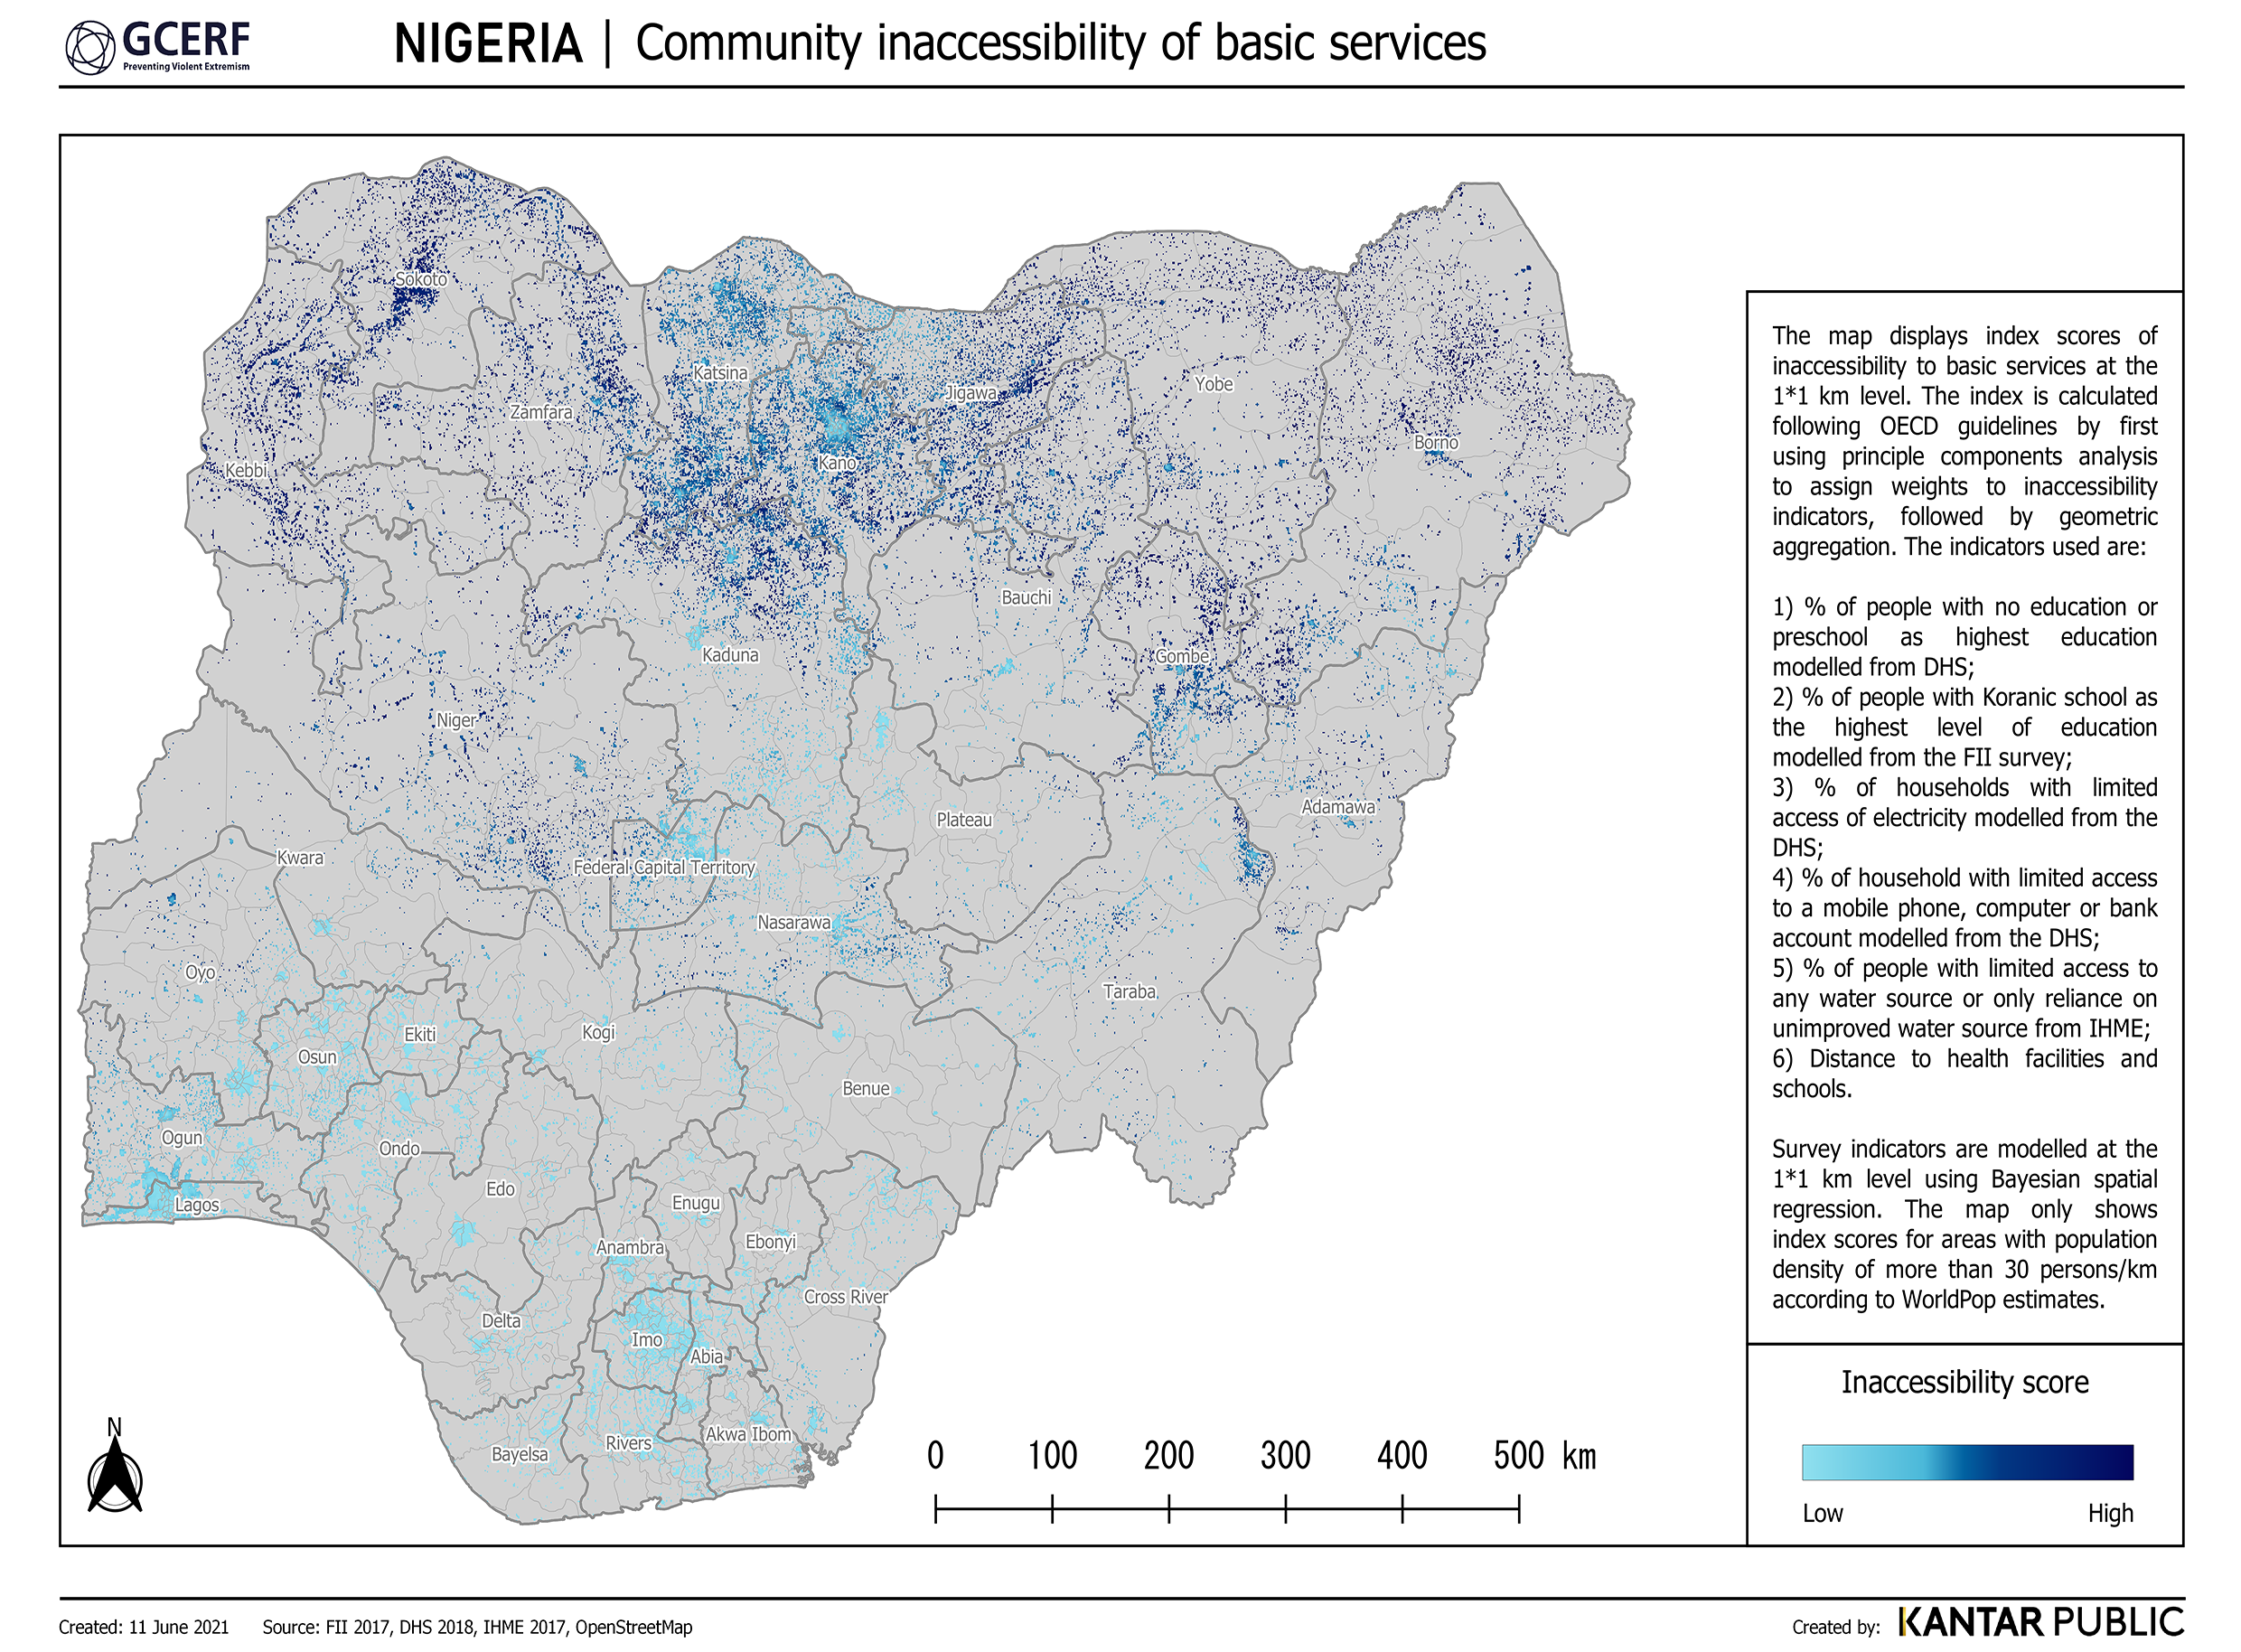 Inaccessibility of Basic Services